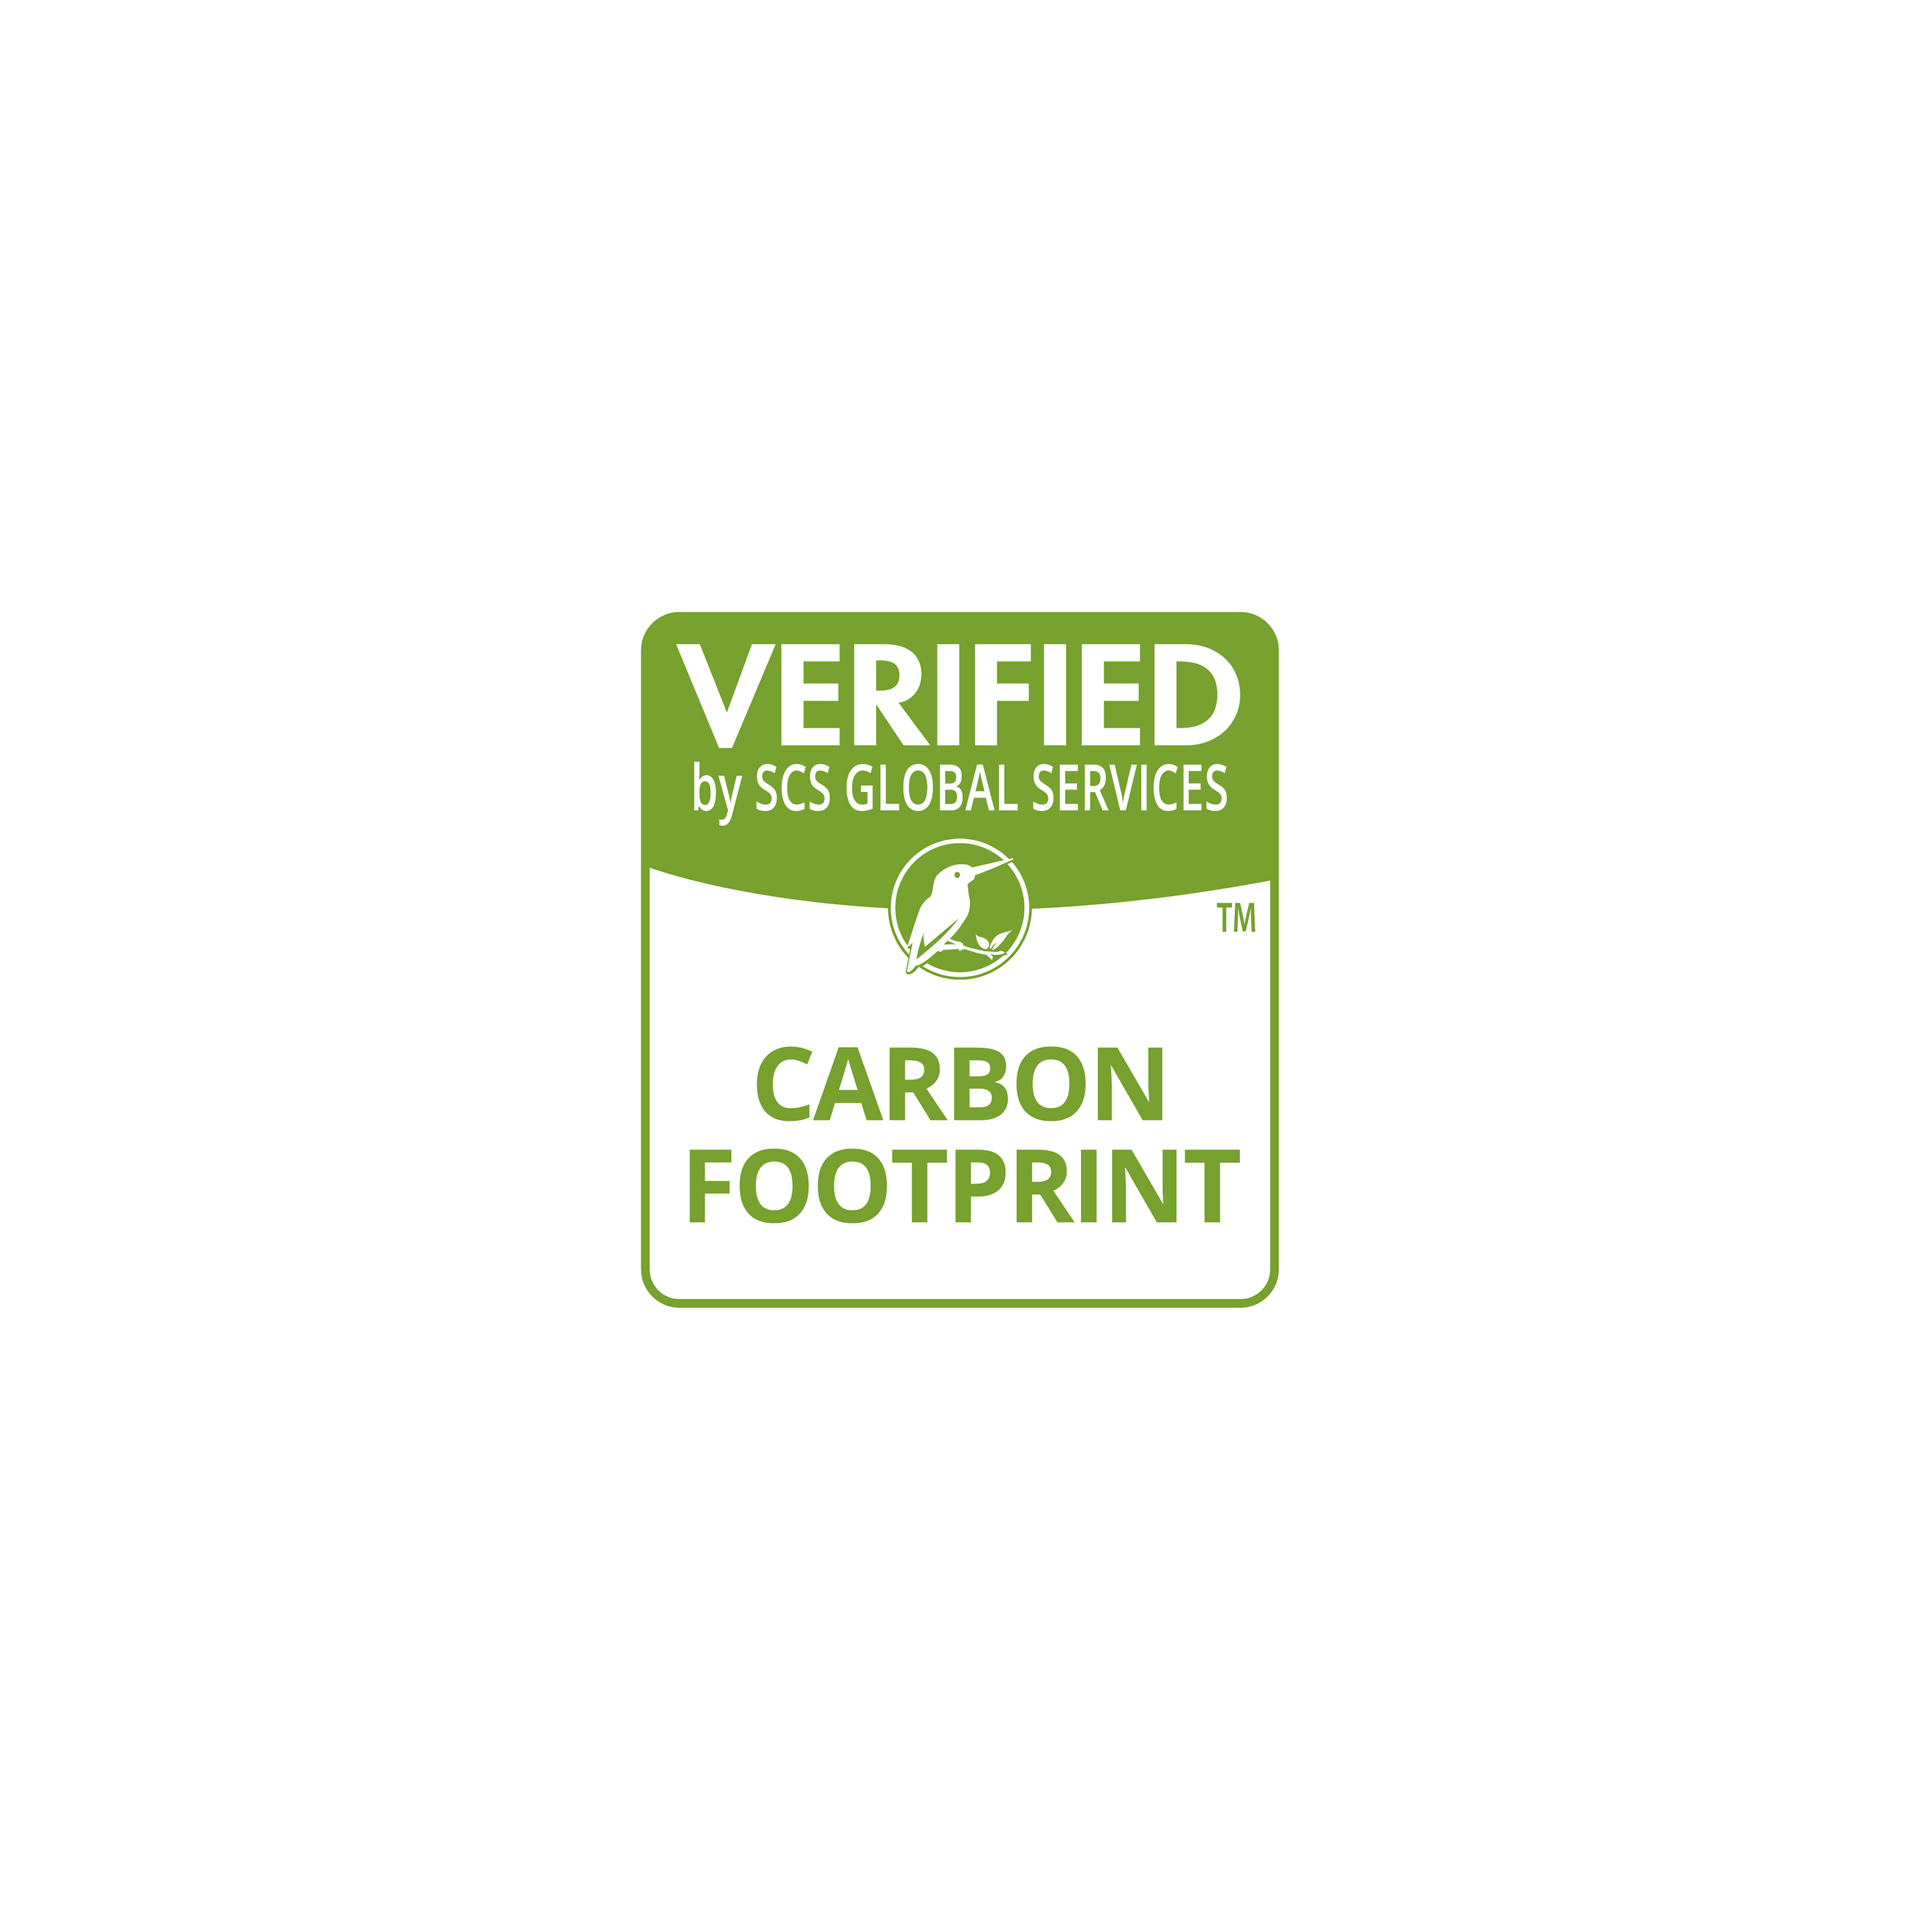 Diamond pursued independent verification of our 2021 entity-wide greenhouse gas (GHG) emissions from SCS Global Services, an international leader in third-party environmental and sustainability certif